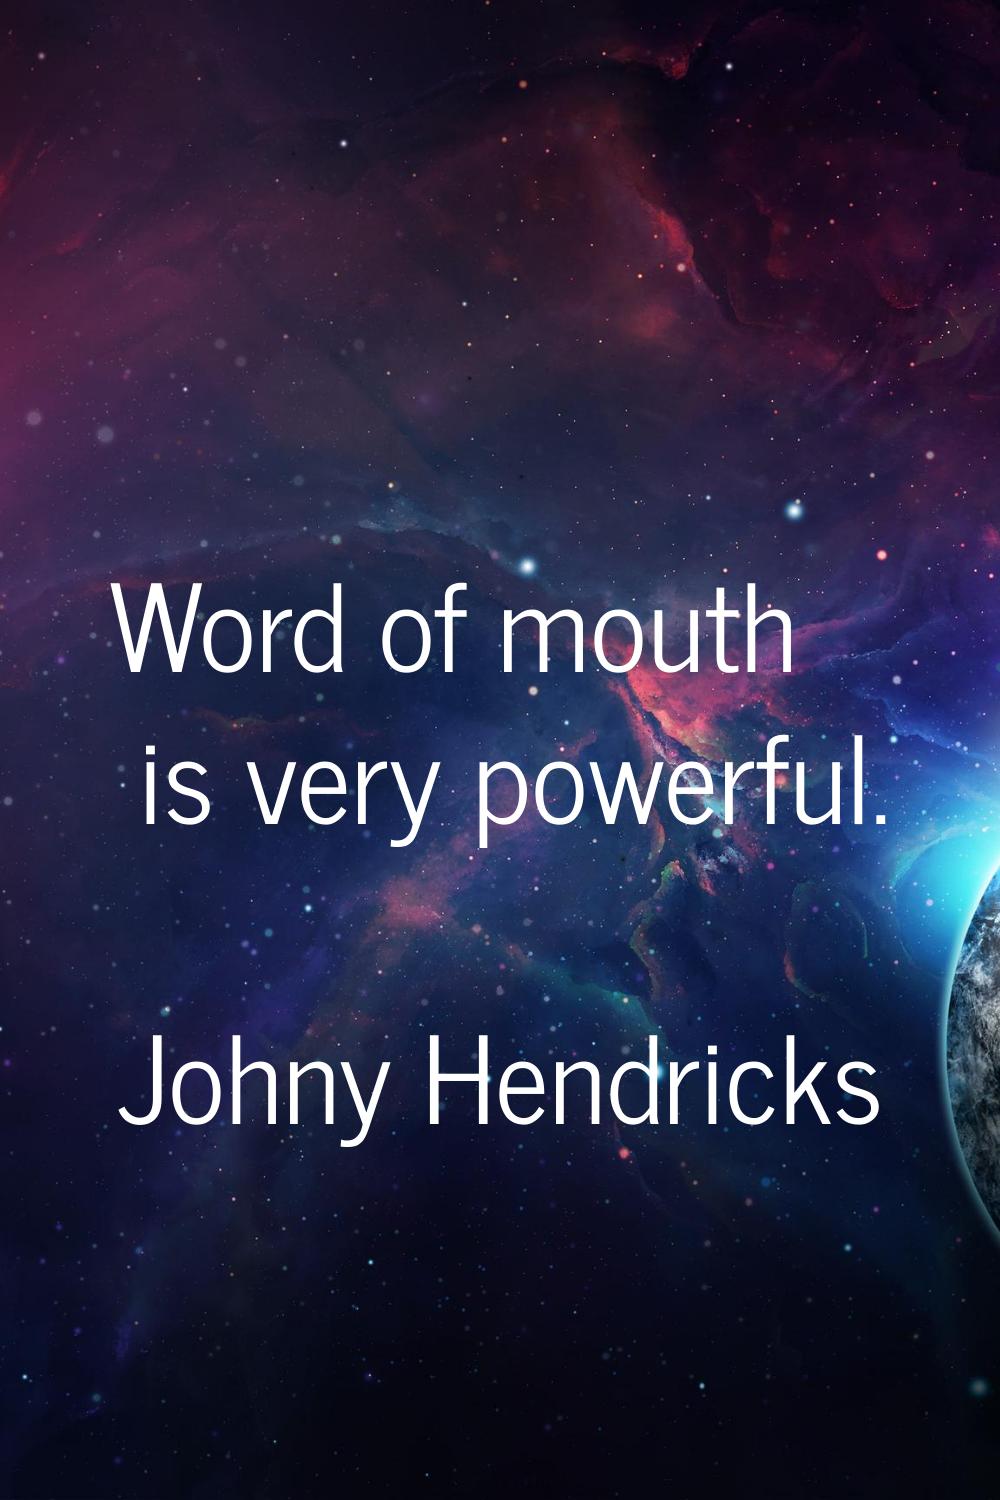 Word of mouth is very powerful.